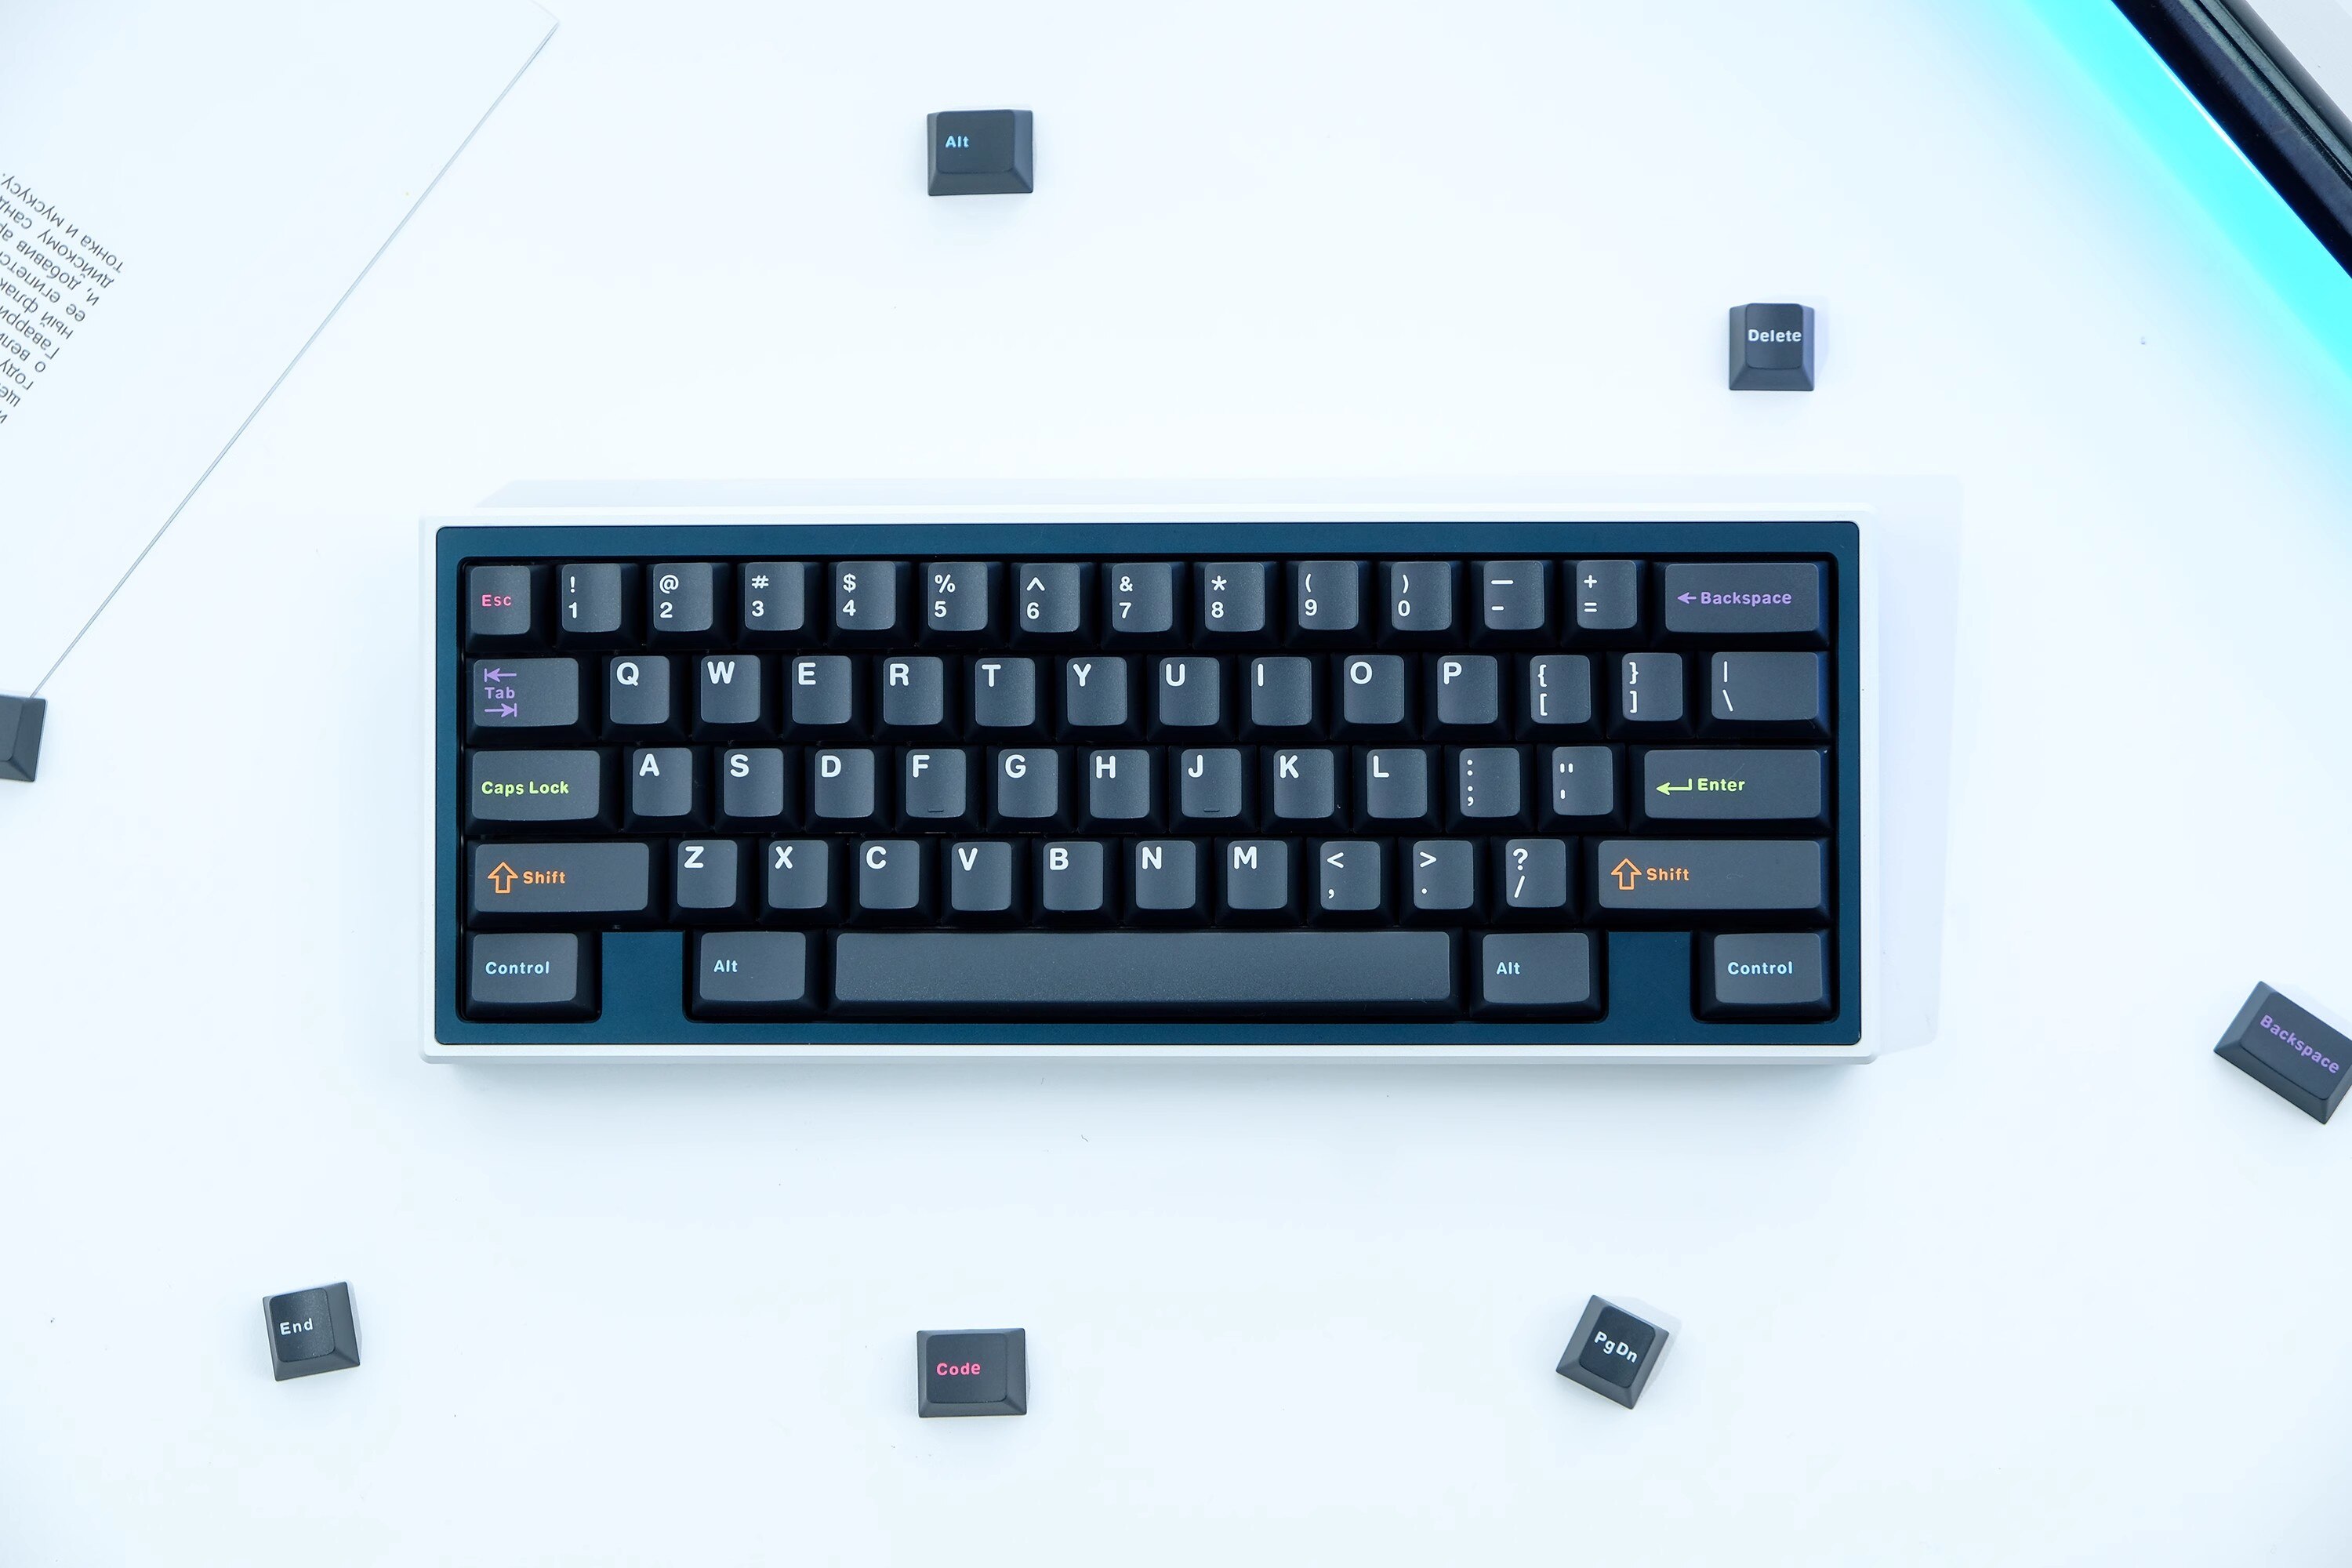 New Arrival 1 Set Aifei Oblivion Keycaps ABS Double Shot Key Caps Cherry Profile Keycap For 4 - GMK Keycap